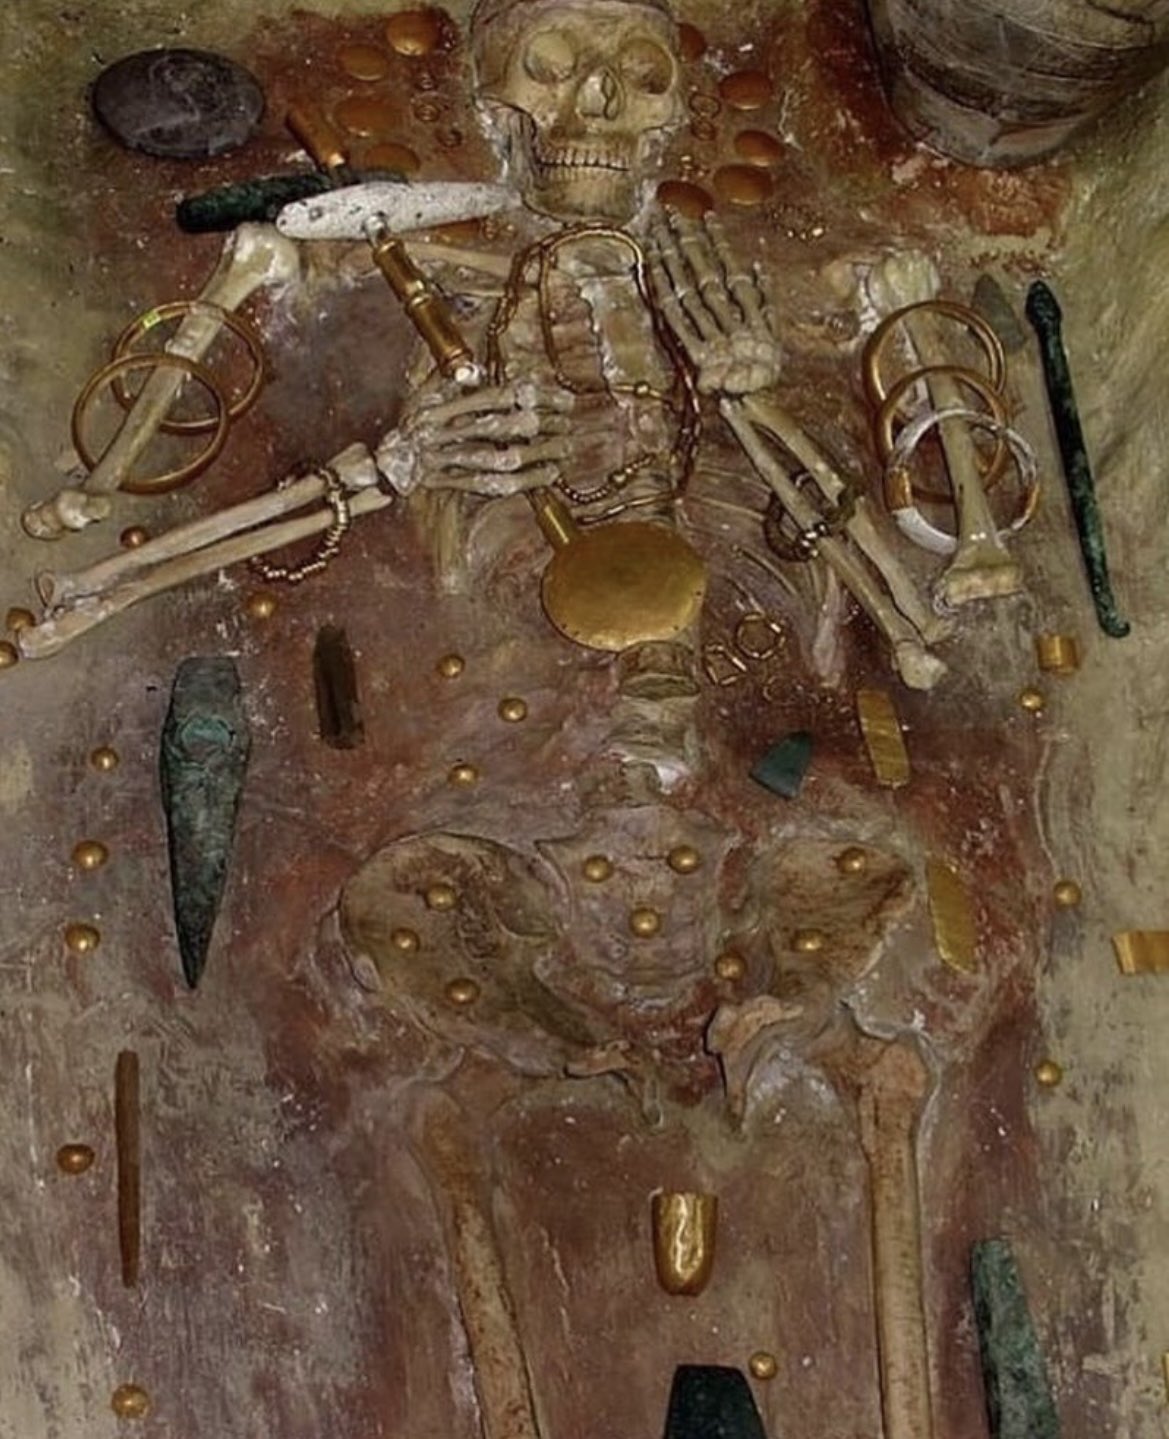 Ancient skeleton with world’s oldest Gold found near the Black Sea